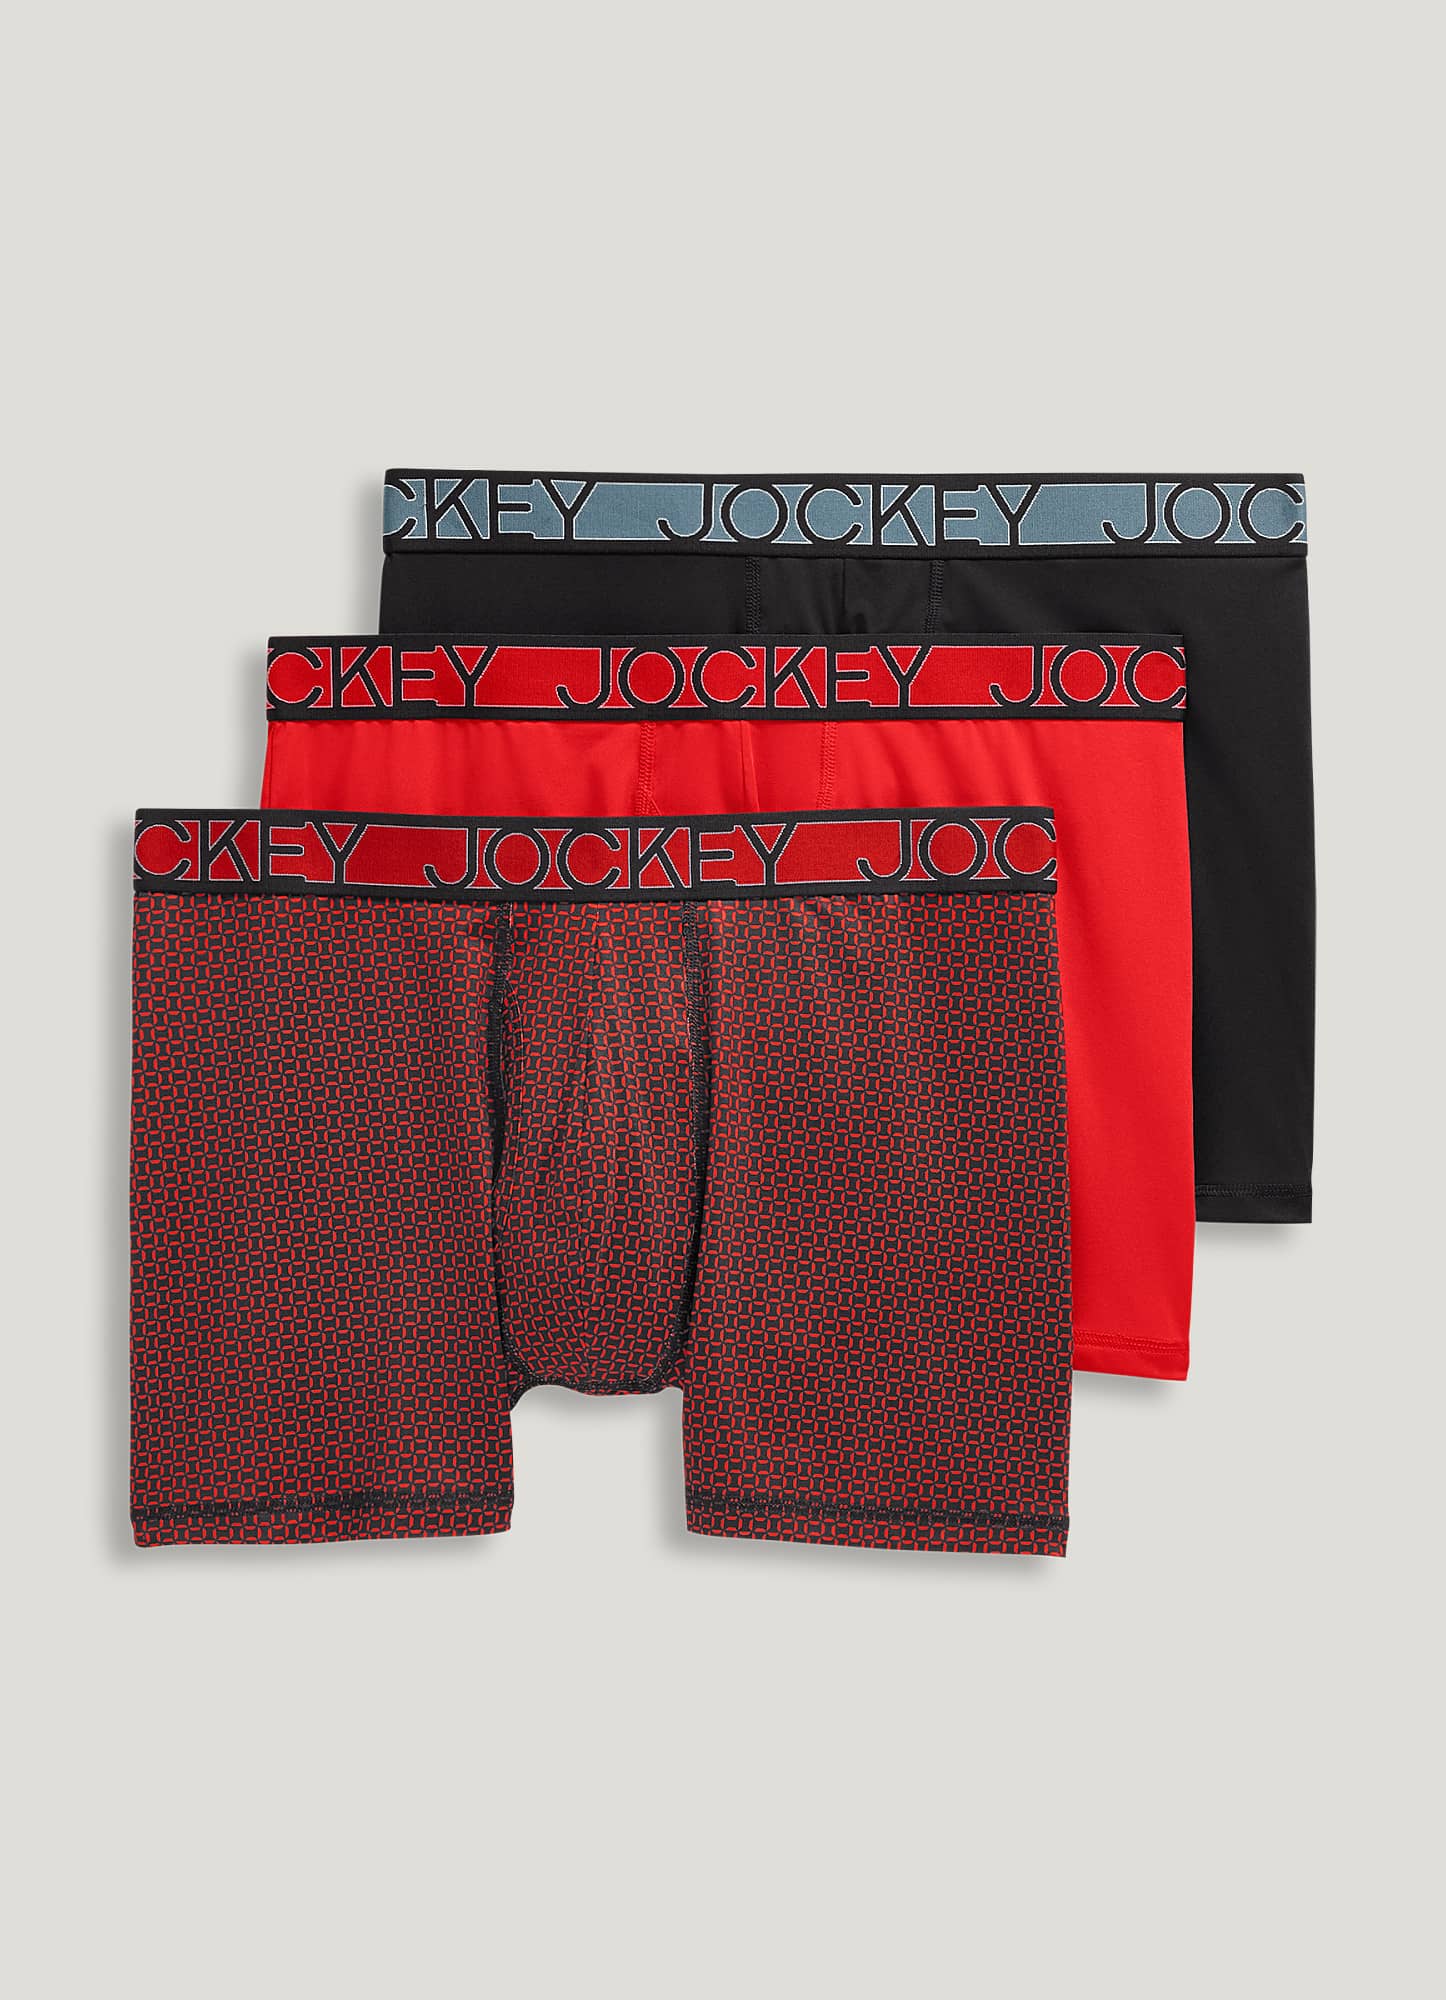 JOCKEY CONTINUES “SHOW 'EM WHAT'S UNDERNEATH” CAMPAIGN